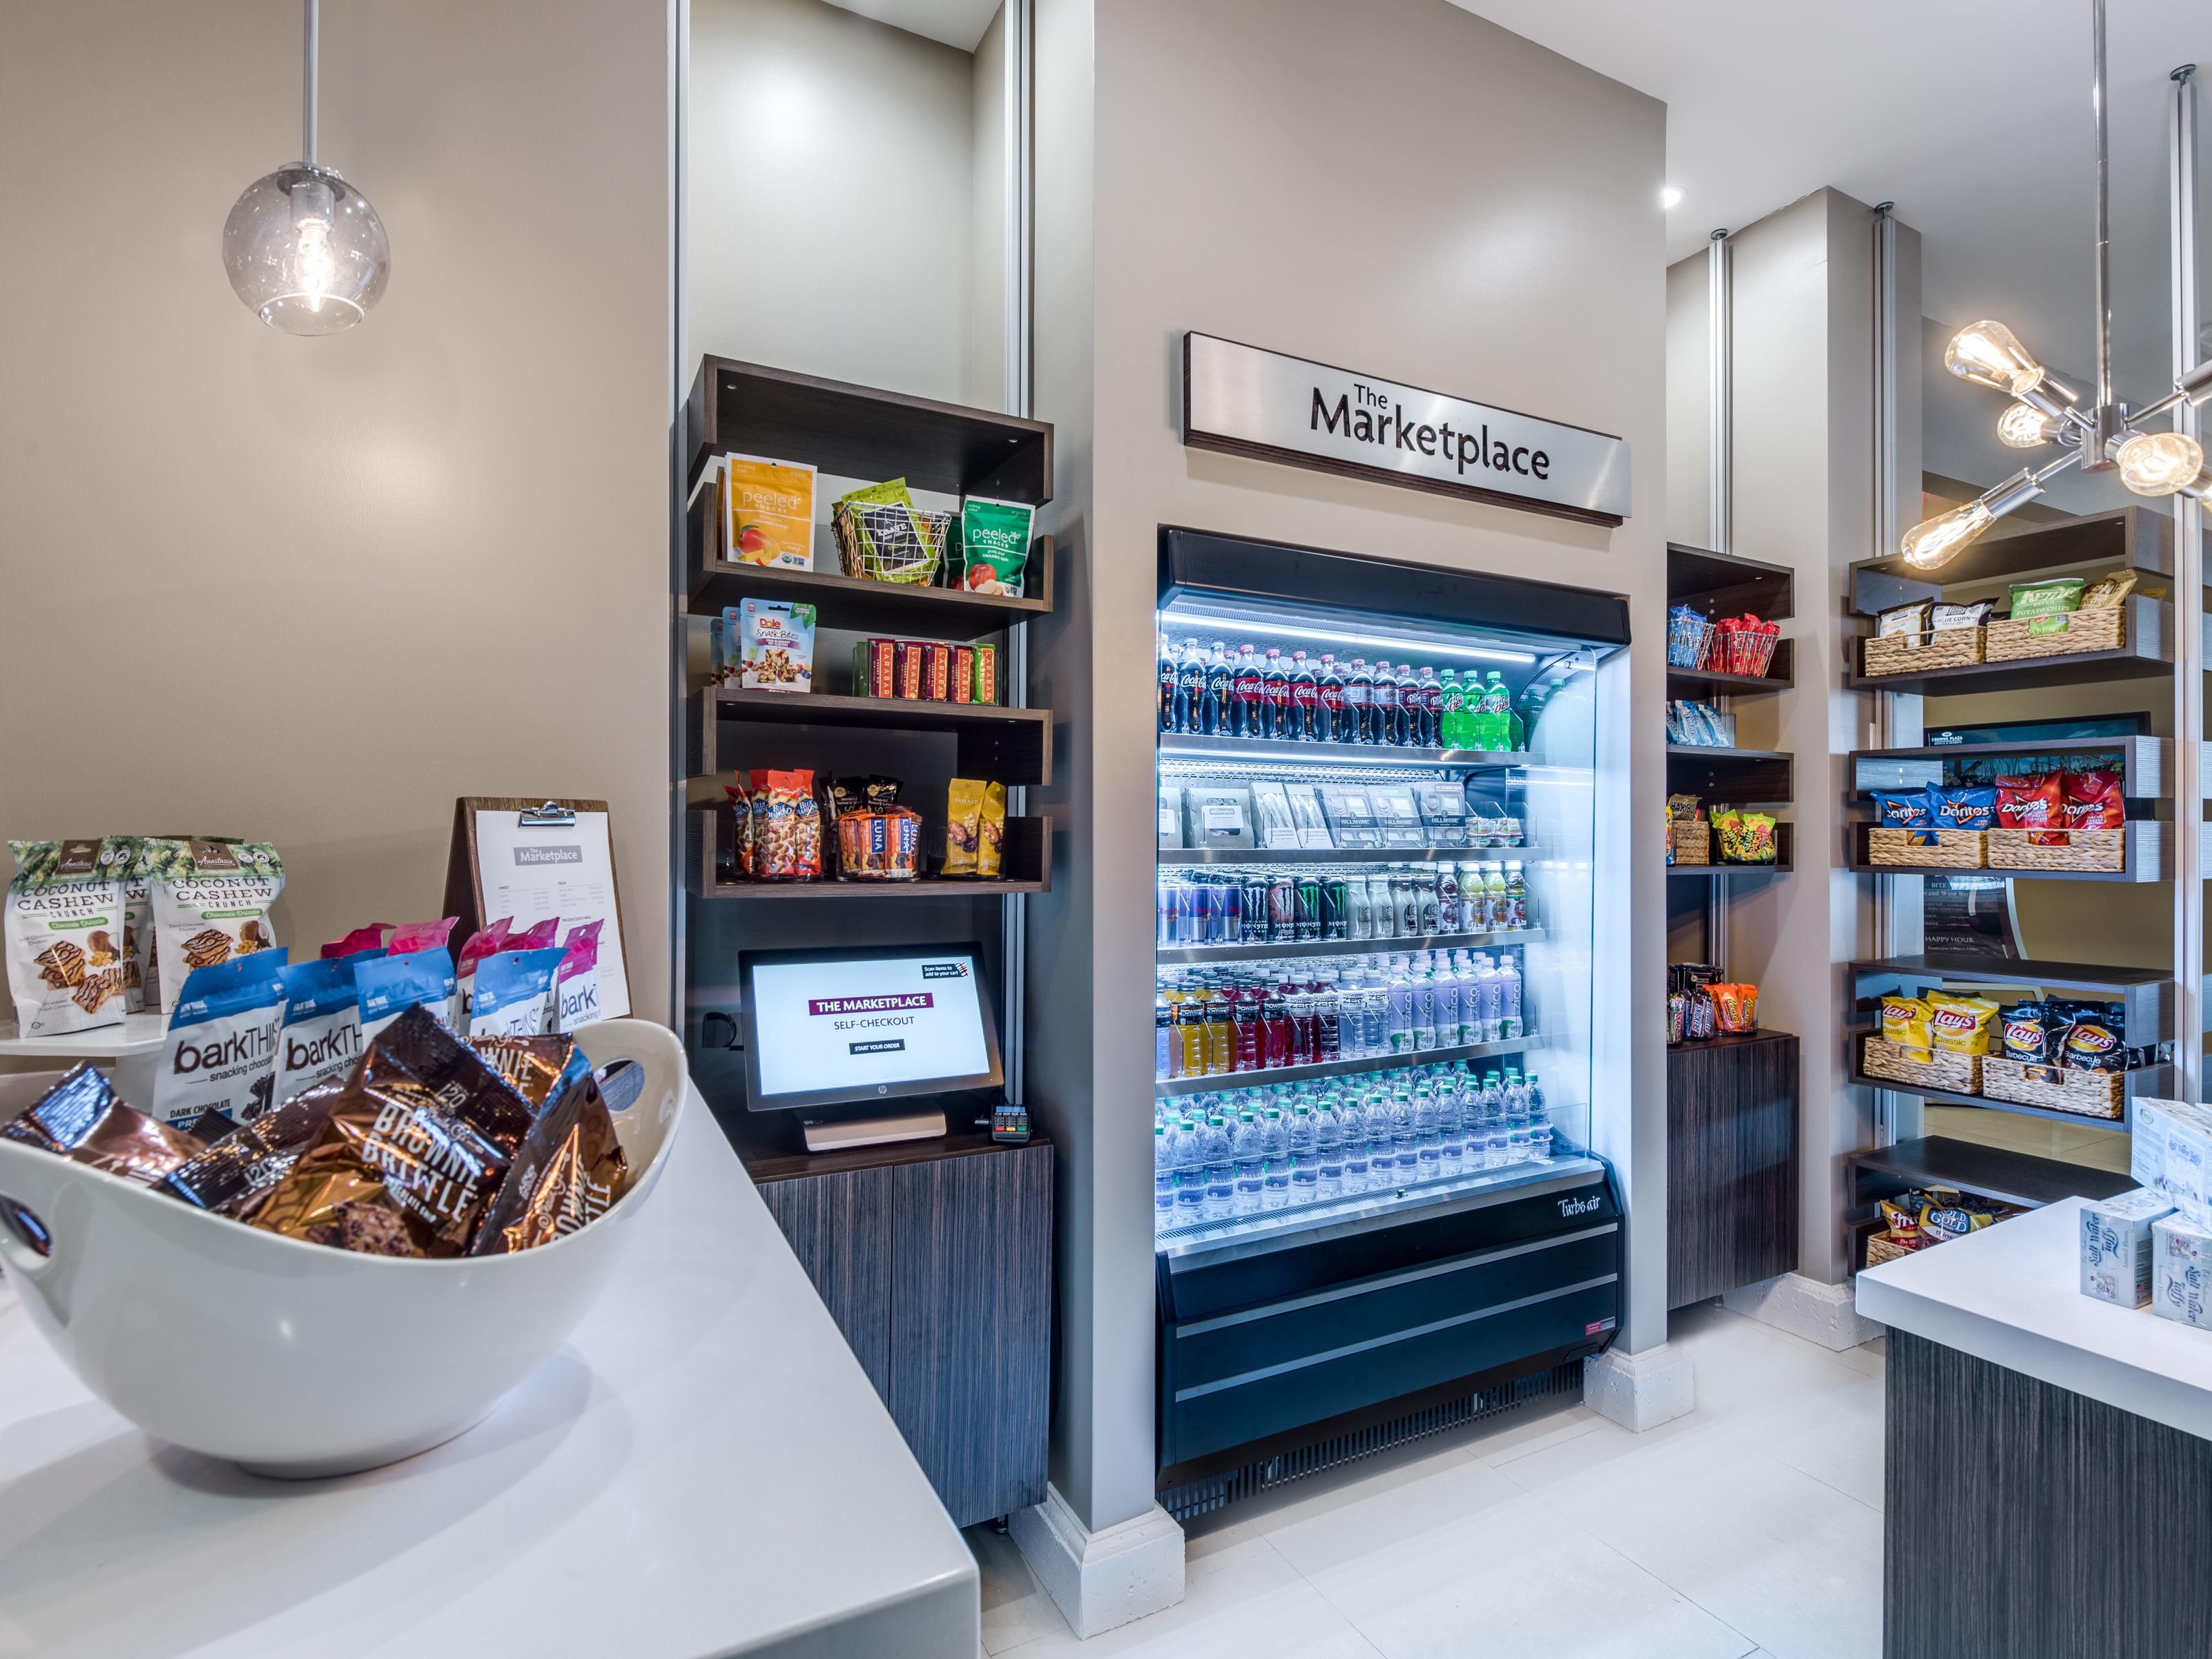 No spare change? Don't worry we don't have vending machines either but we do have The Marketplace. Here you can grab your favorite snacks or beverages and charge it straight to your room or credit card. So snack away 24-hours a day! 